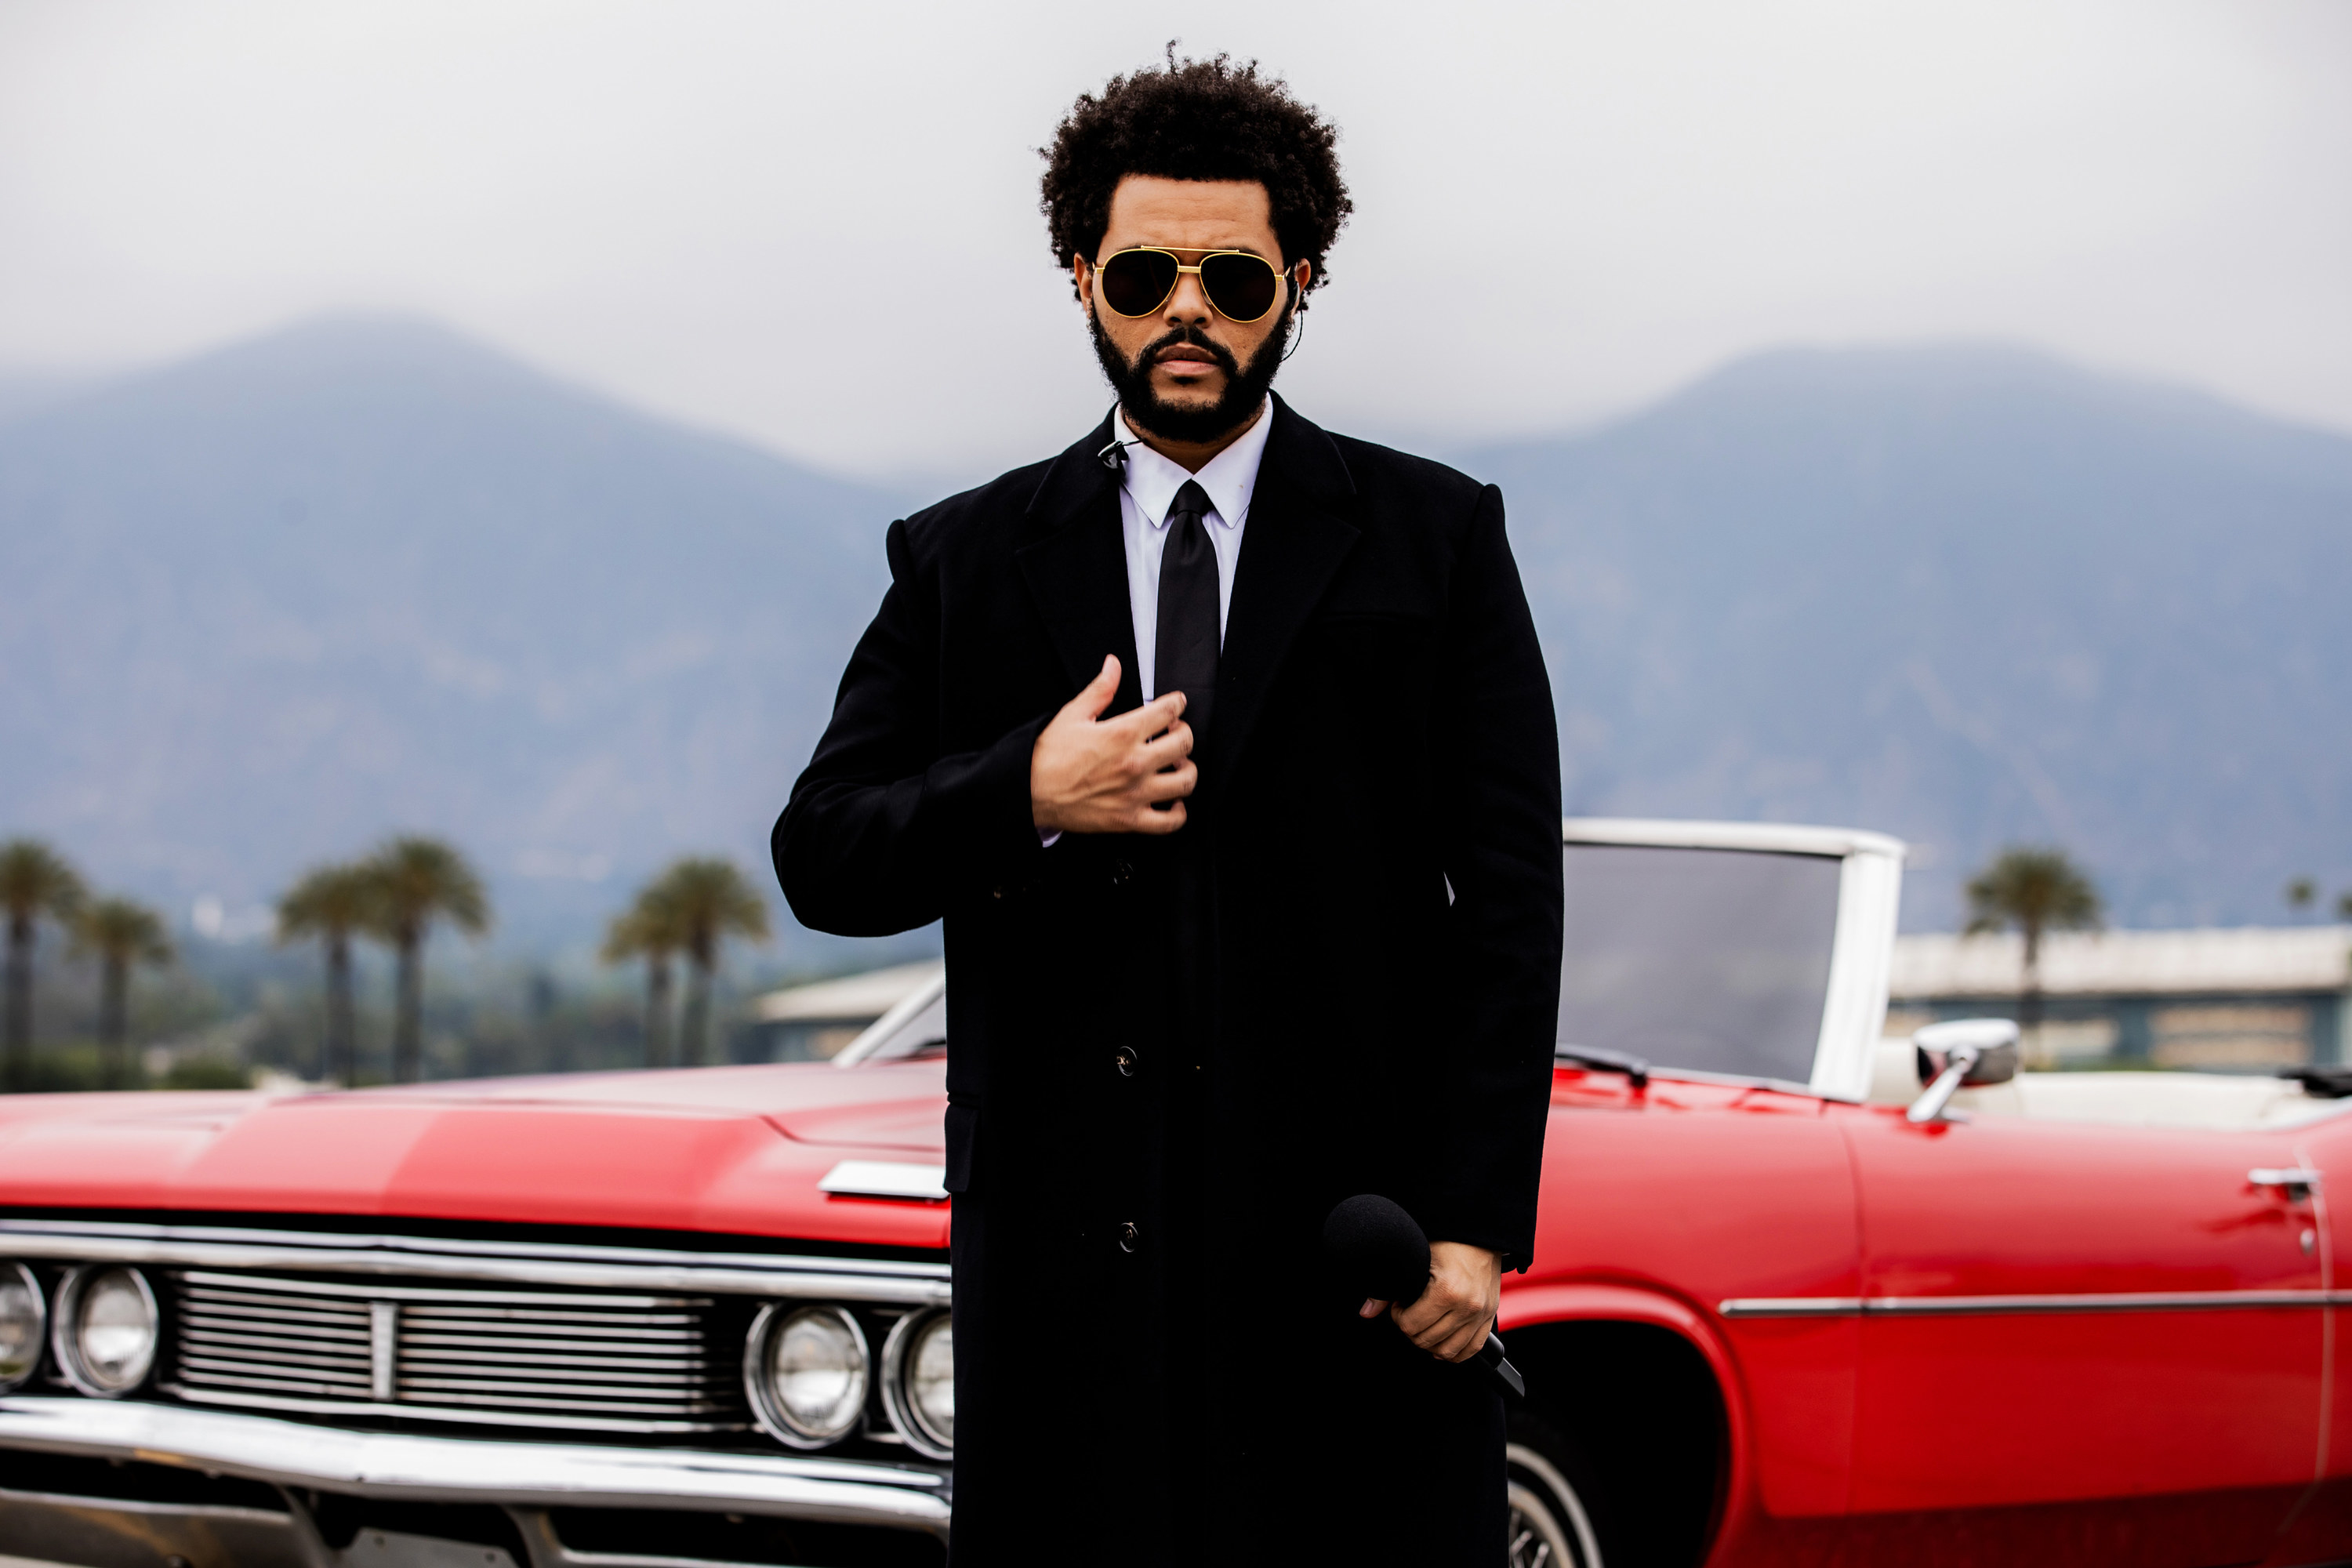 The Weeknd in a suit and coat and sunglasses with a convertible car behind him